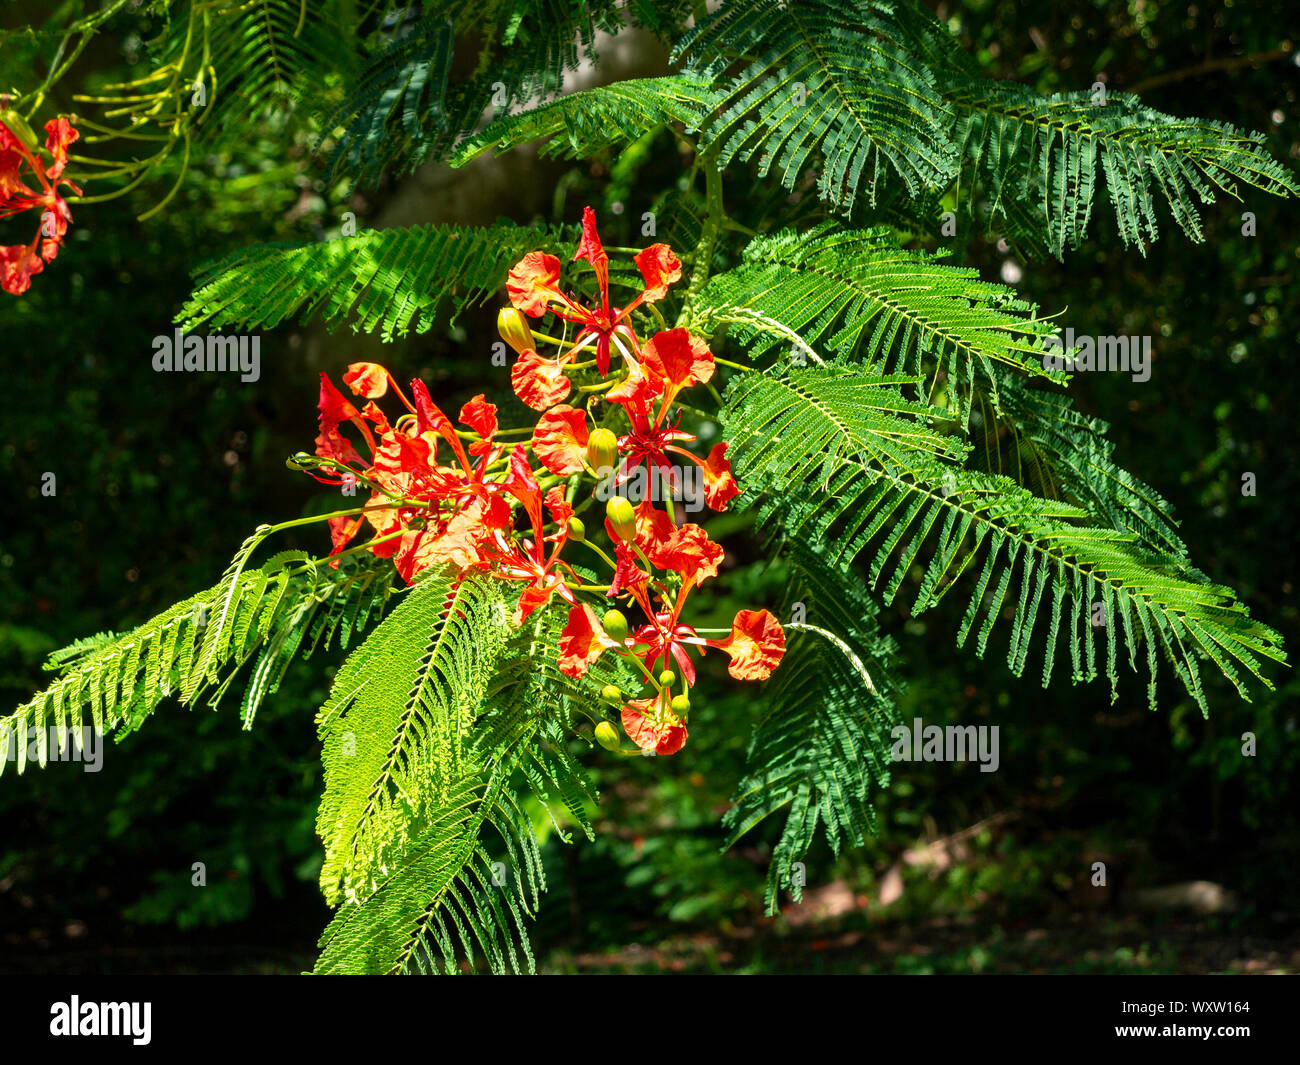 Close up areas of a flame tree in bloom, Bermuda Stock Photo